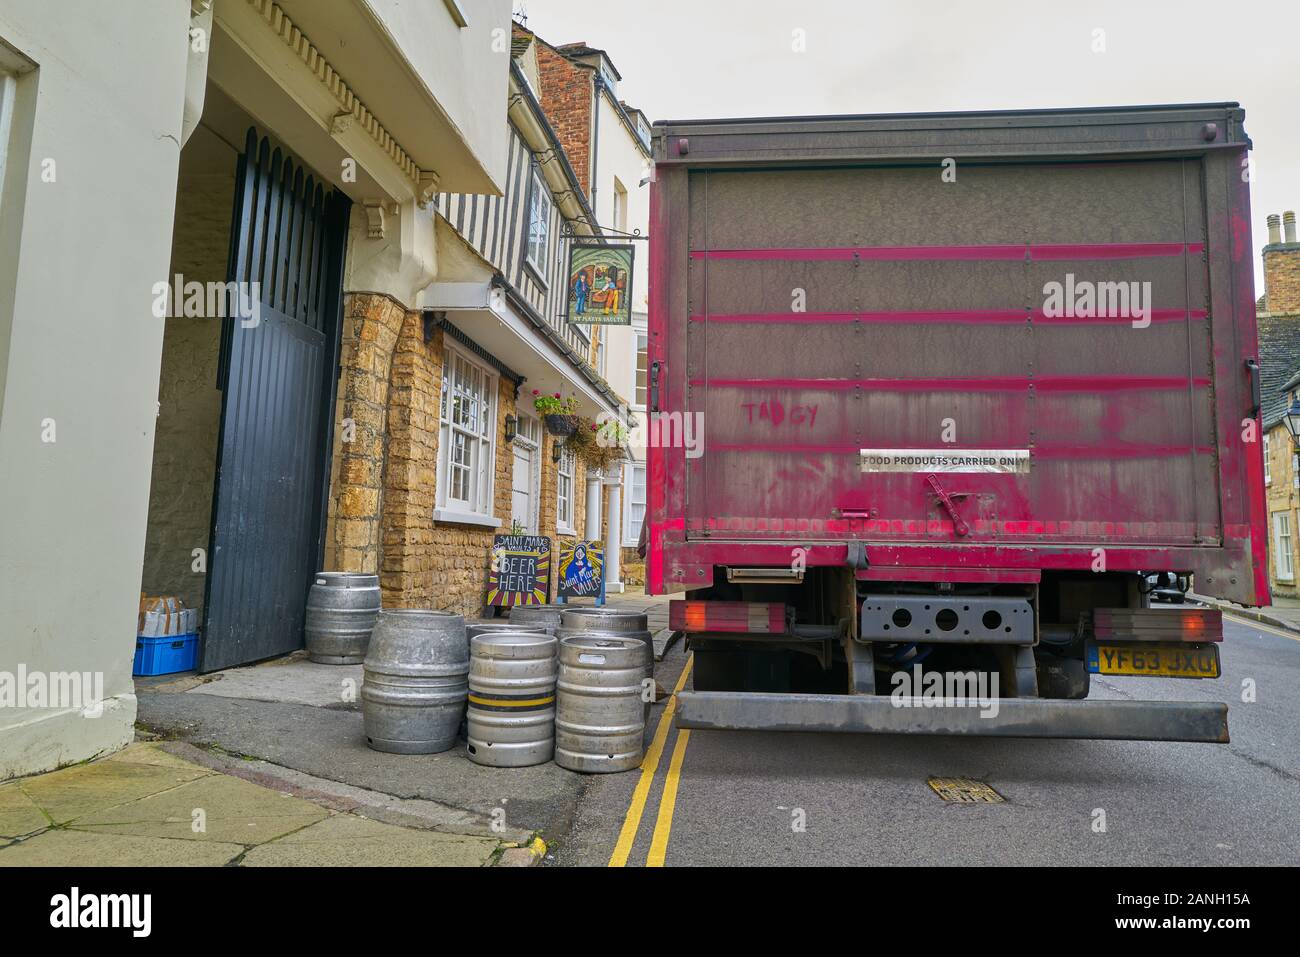 Lorry delivery of kegs of beer to the pub named St Mary’s Vaults in the town of Stamford, Lincolnshire, England. Stock Photo